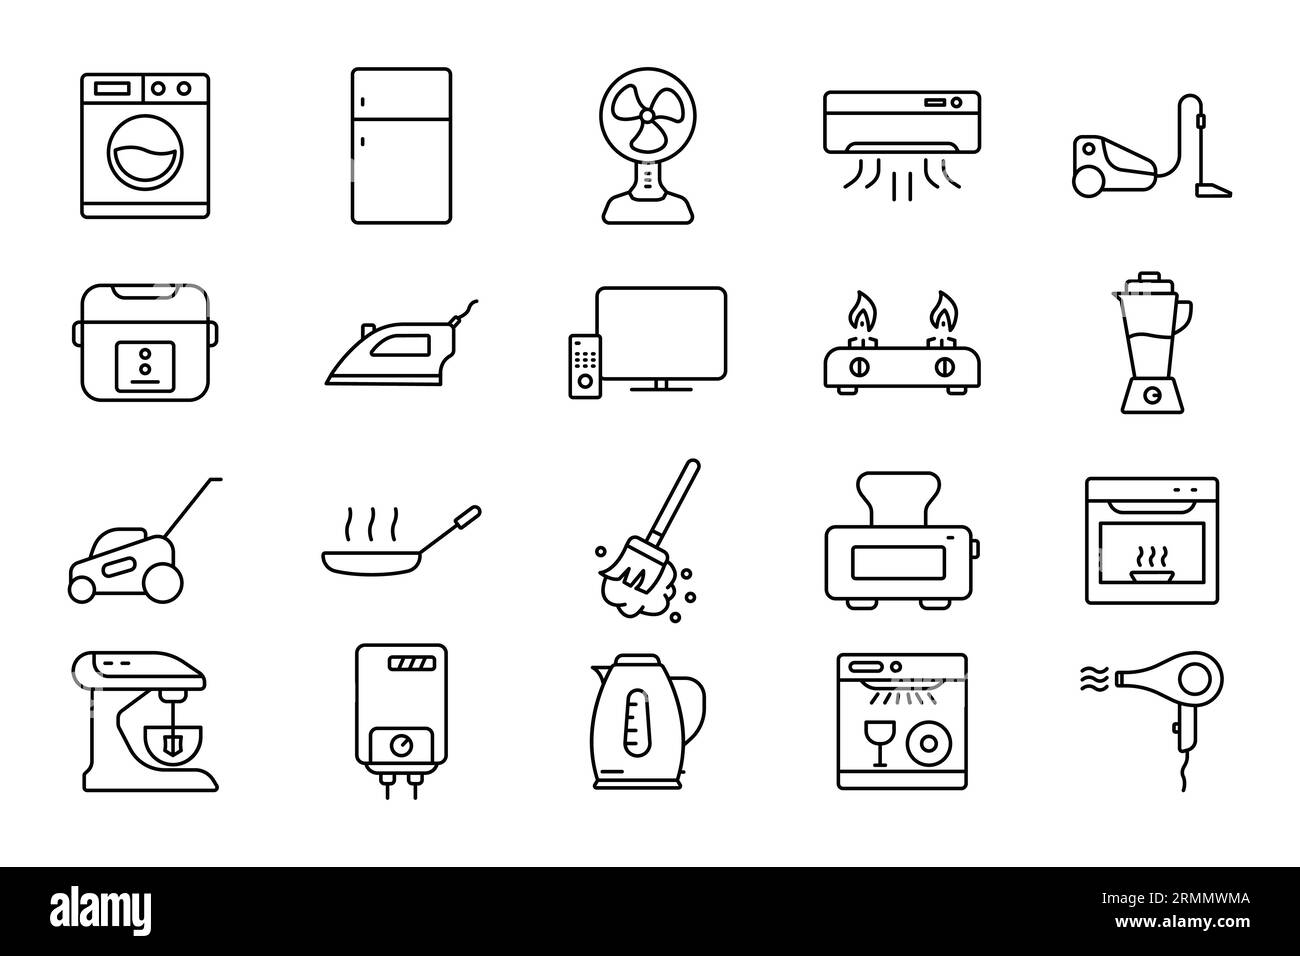 Home appliance icon set. icon related to household appliance. Containing washing machine, refrigerator, fan, vacuum cleaner, TV and more. Line icon st Stock Vector